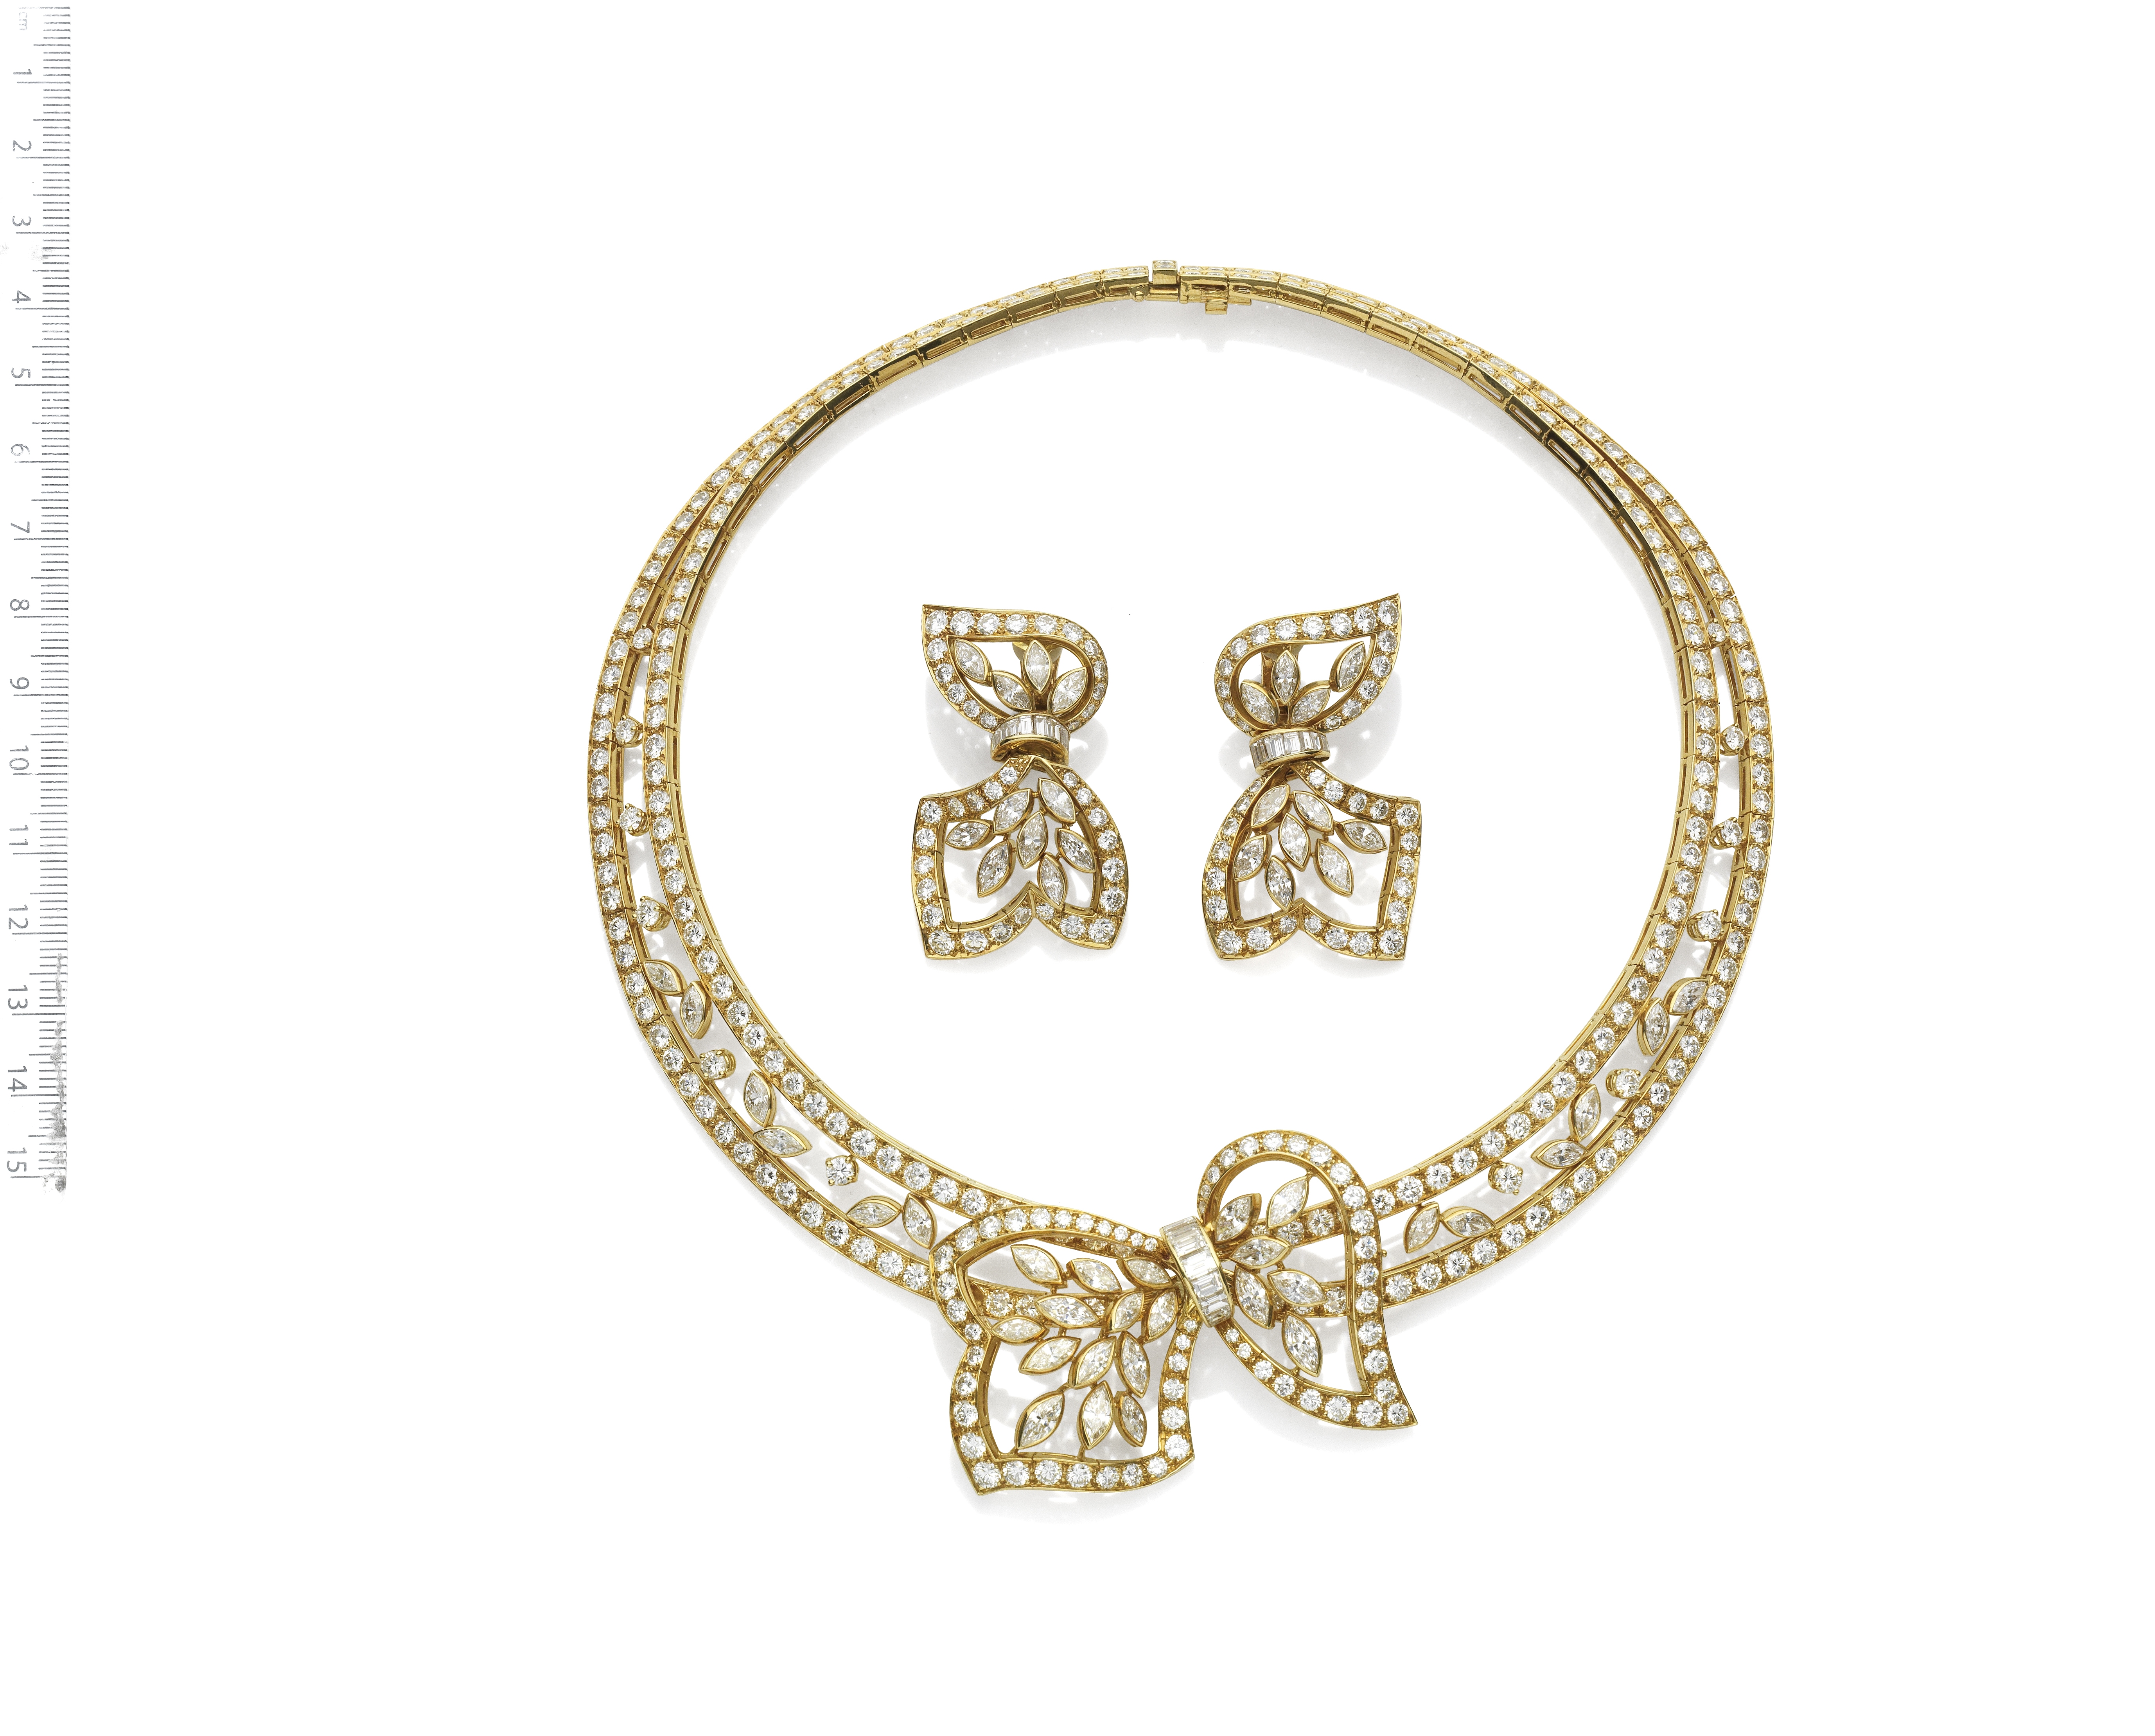 A DIAMOND NECKLACE AND EARCLIP SUITE, BY BOUCHERON,